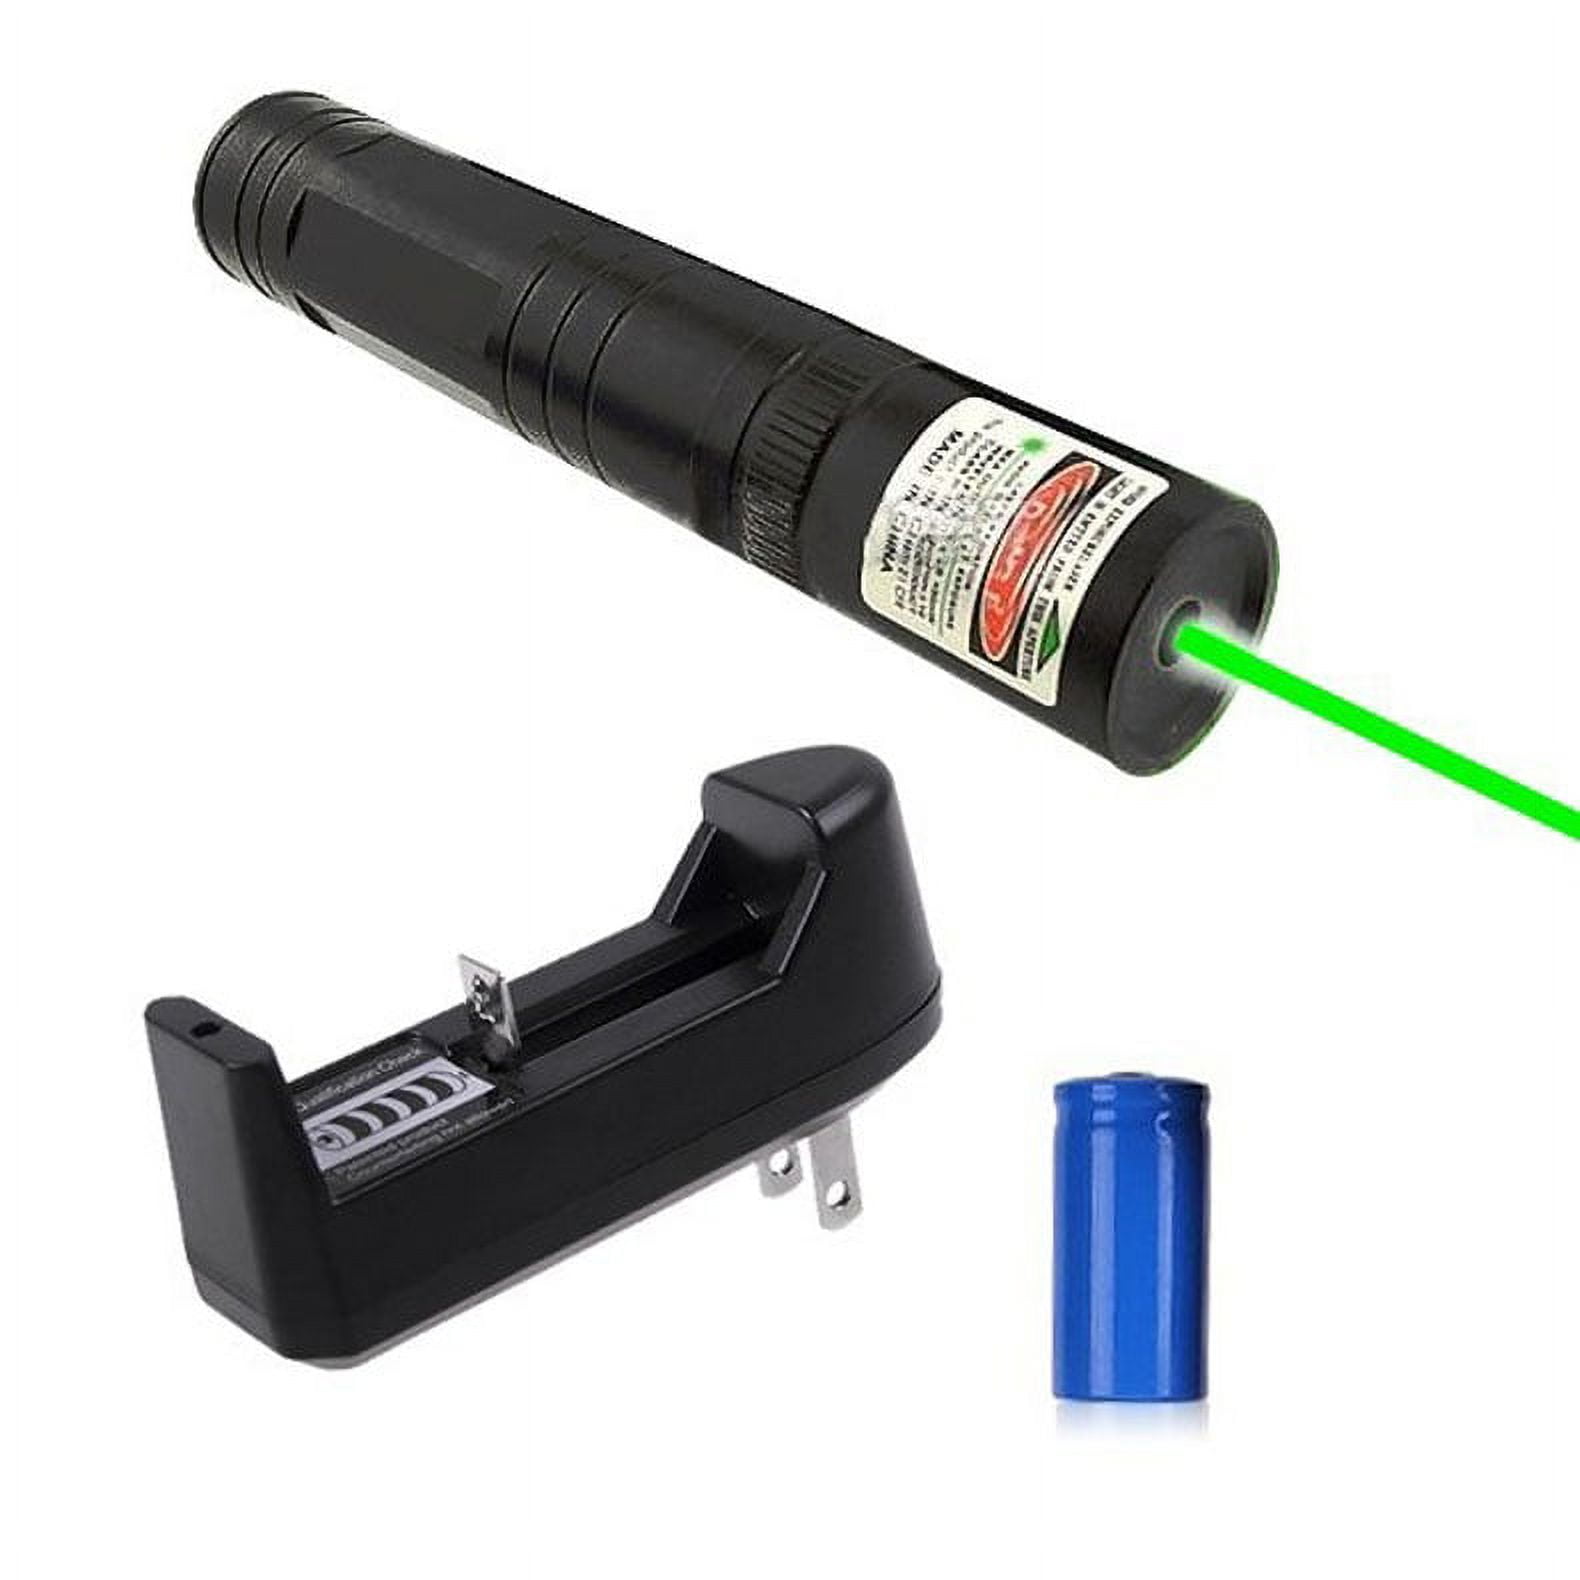 Super 5 Watt Laser Pointer 009 With 532nm Green Light, USB Charging,  Visible Beam, And 10000m Range Perfect Cat Toy From Hwx01, $6.81